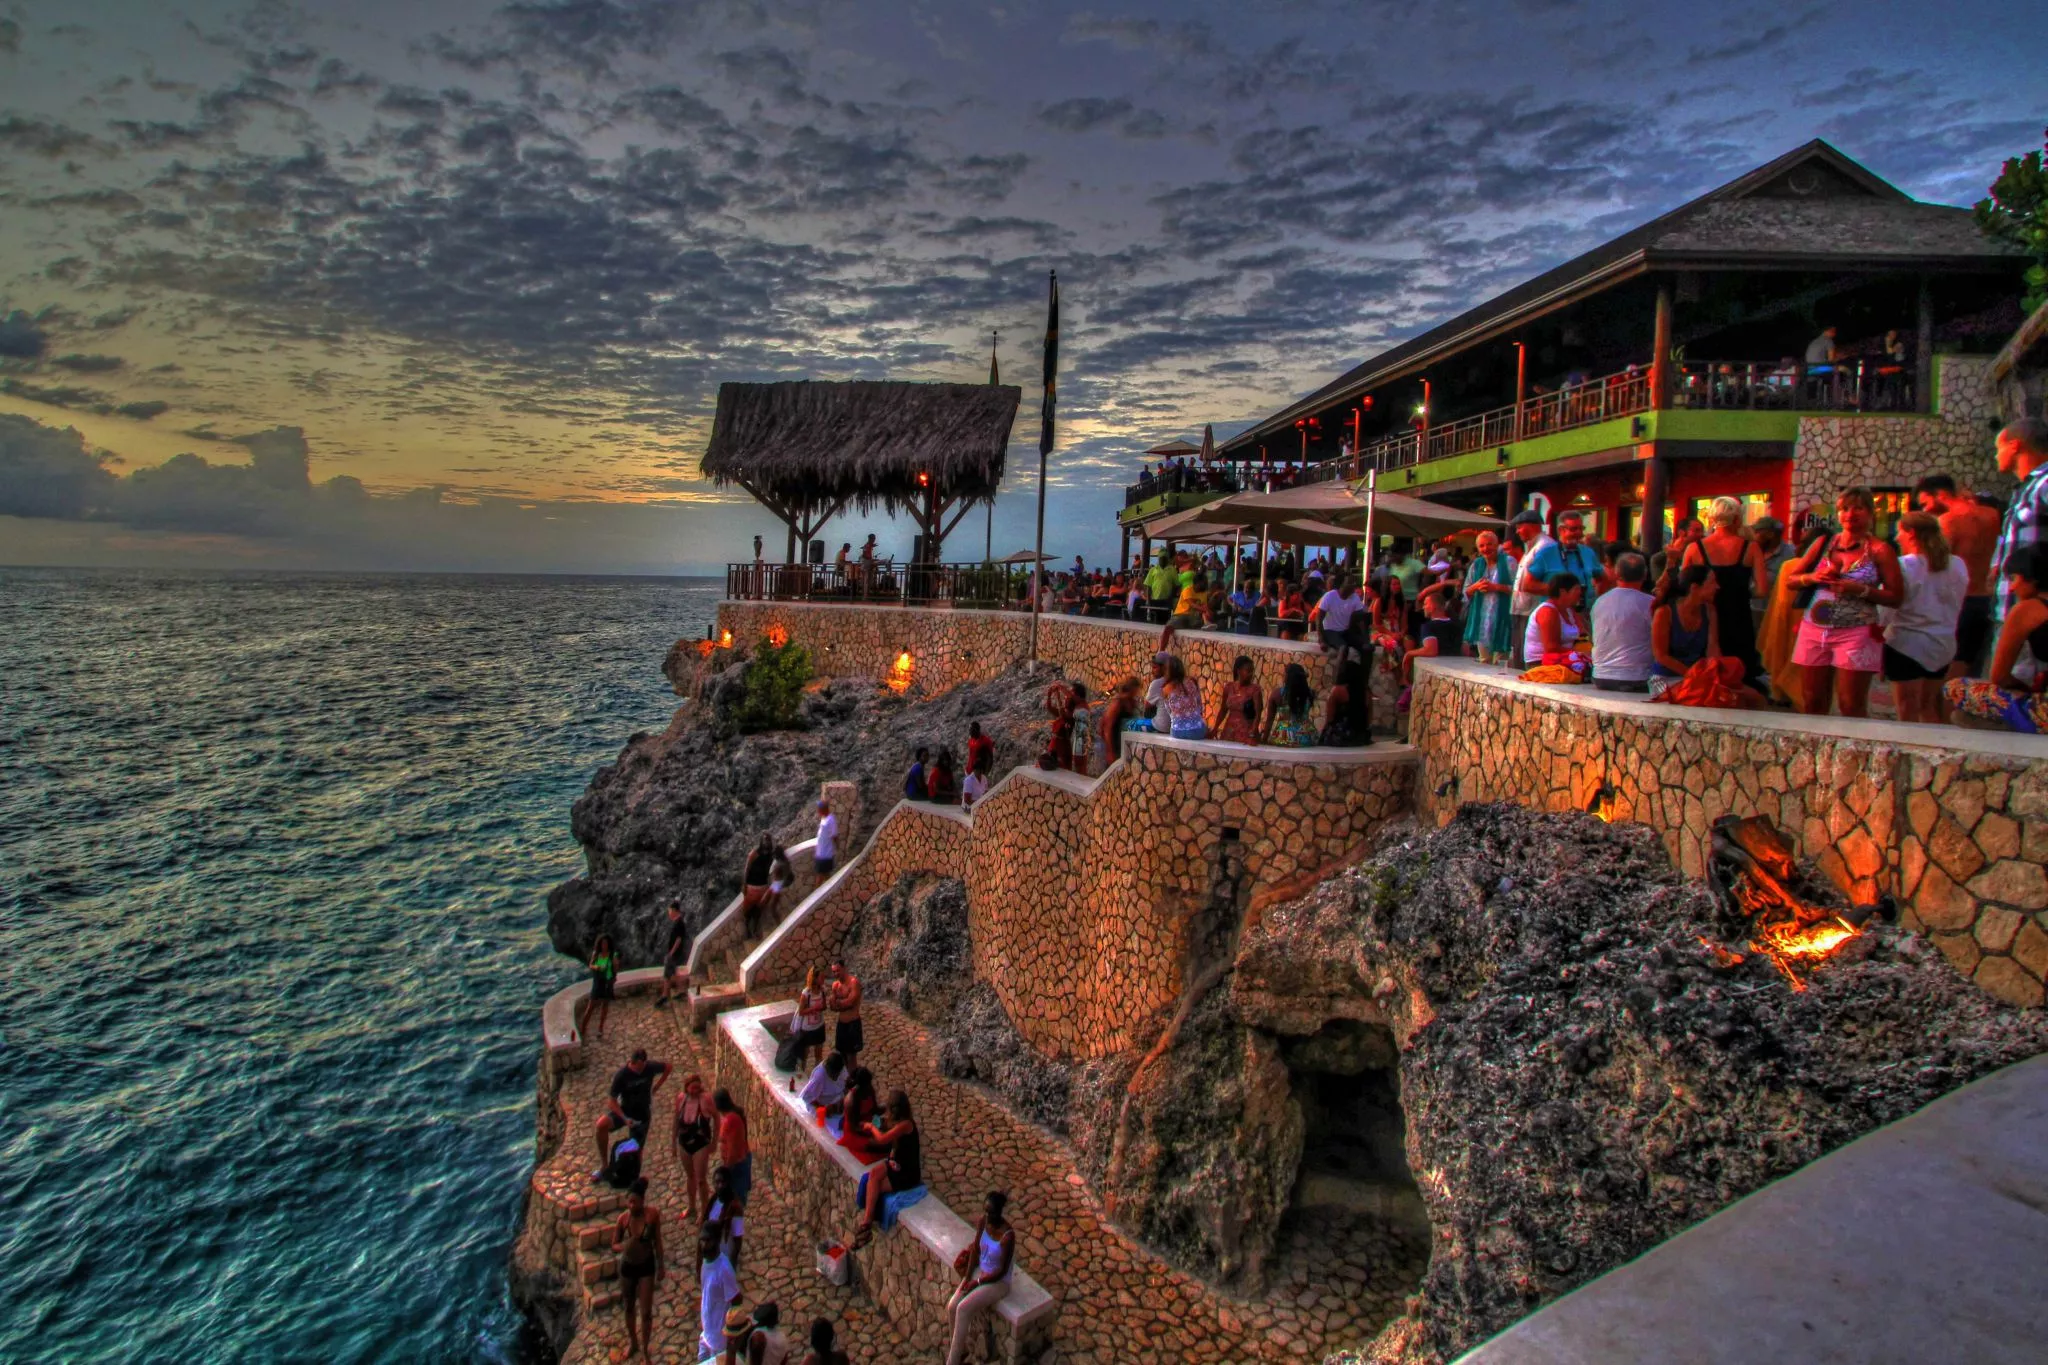 Rick's Cafe in Jamaica, Caribbean | Restaurants,Swimming - Rated 4.8